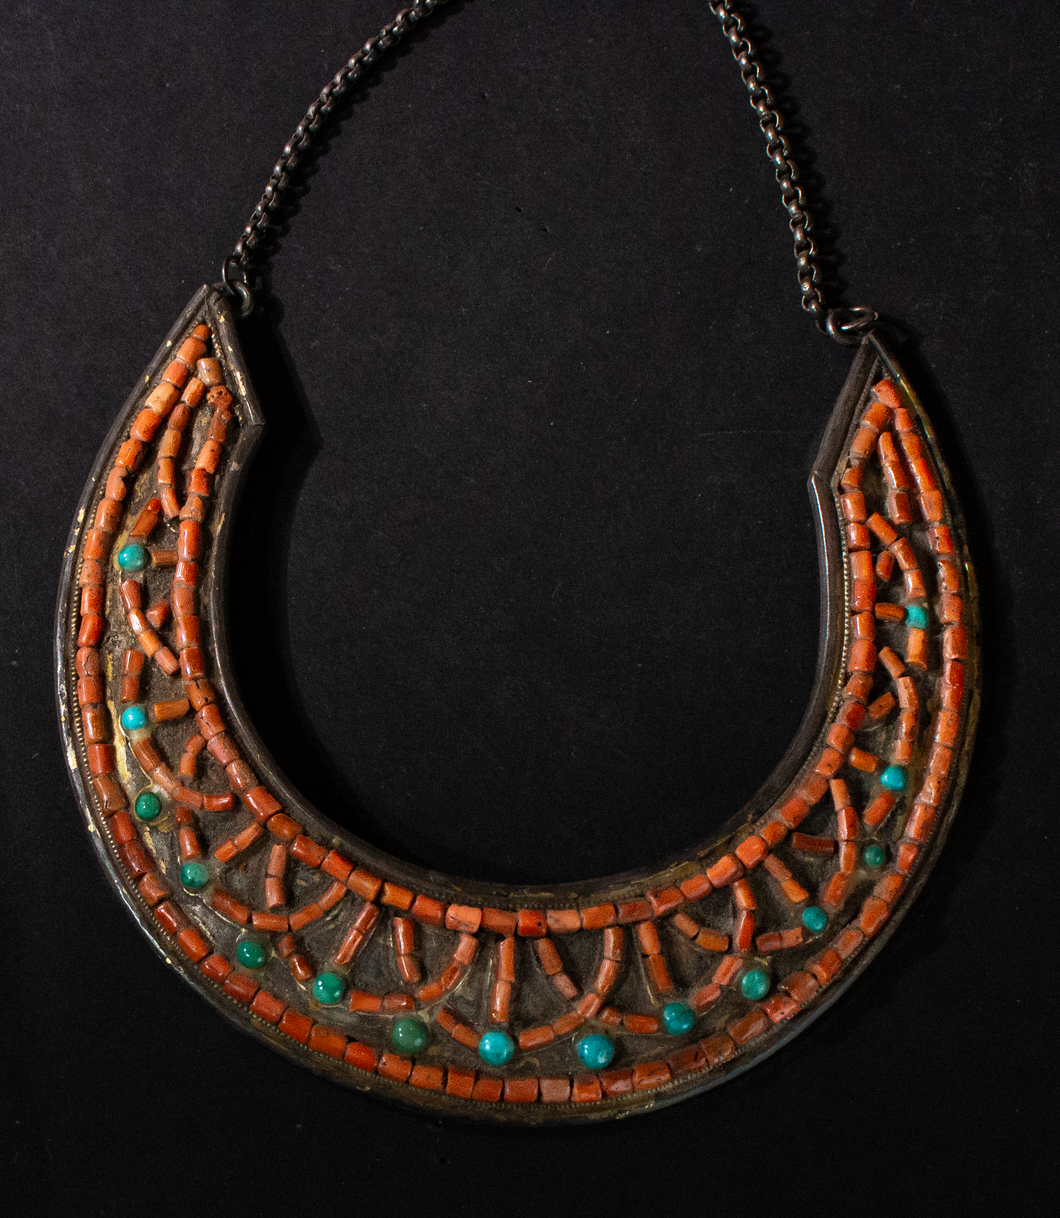 Buryat Necklace with Coral and Turquoise Inlay